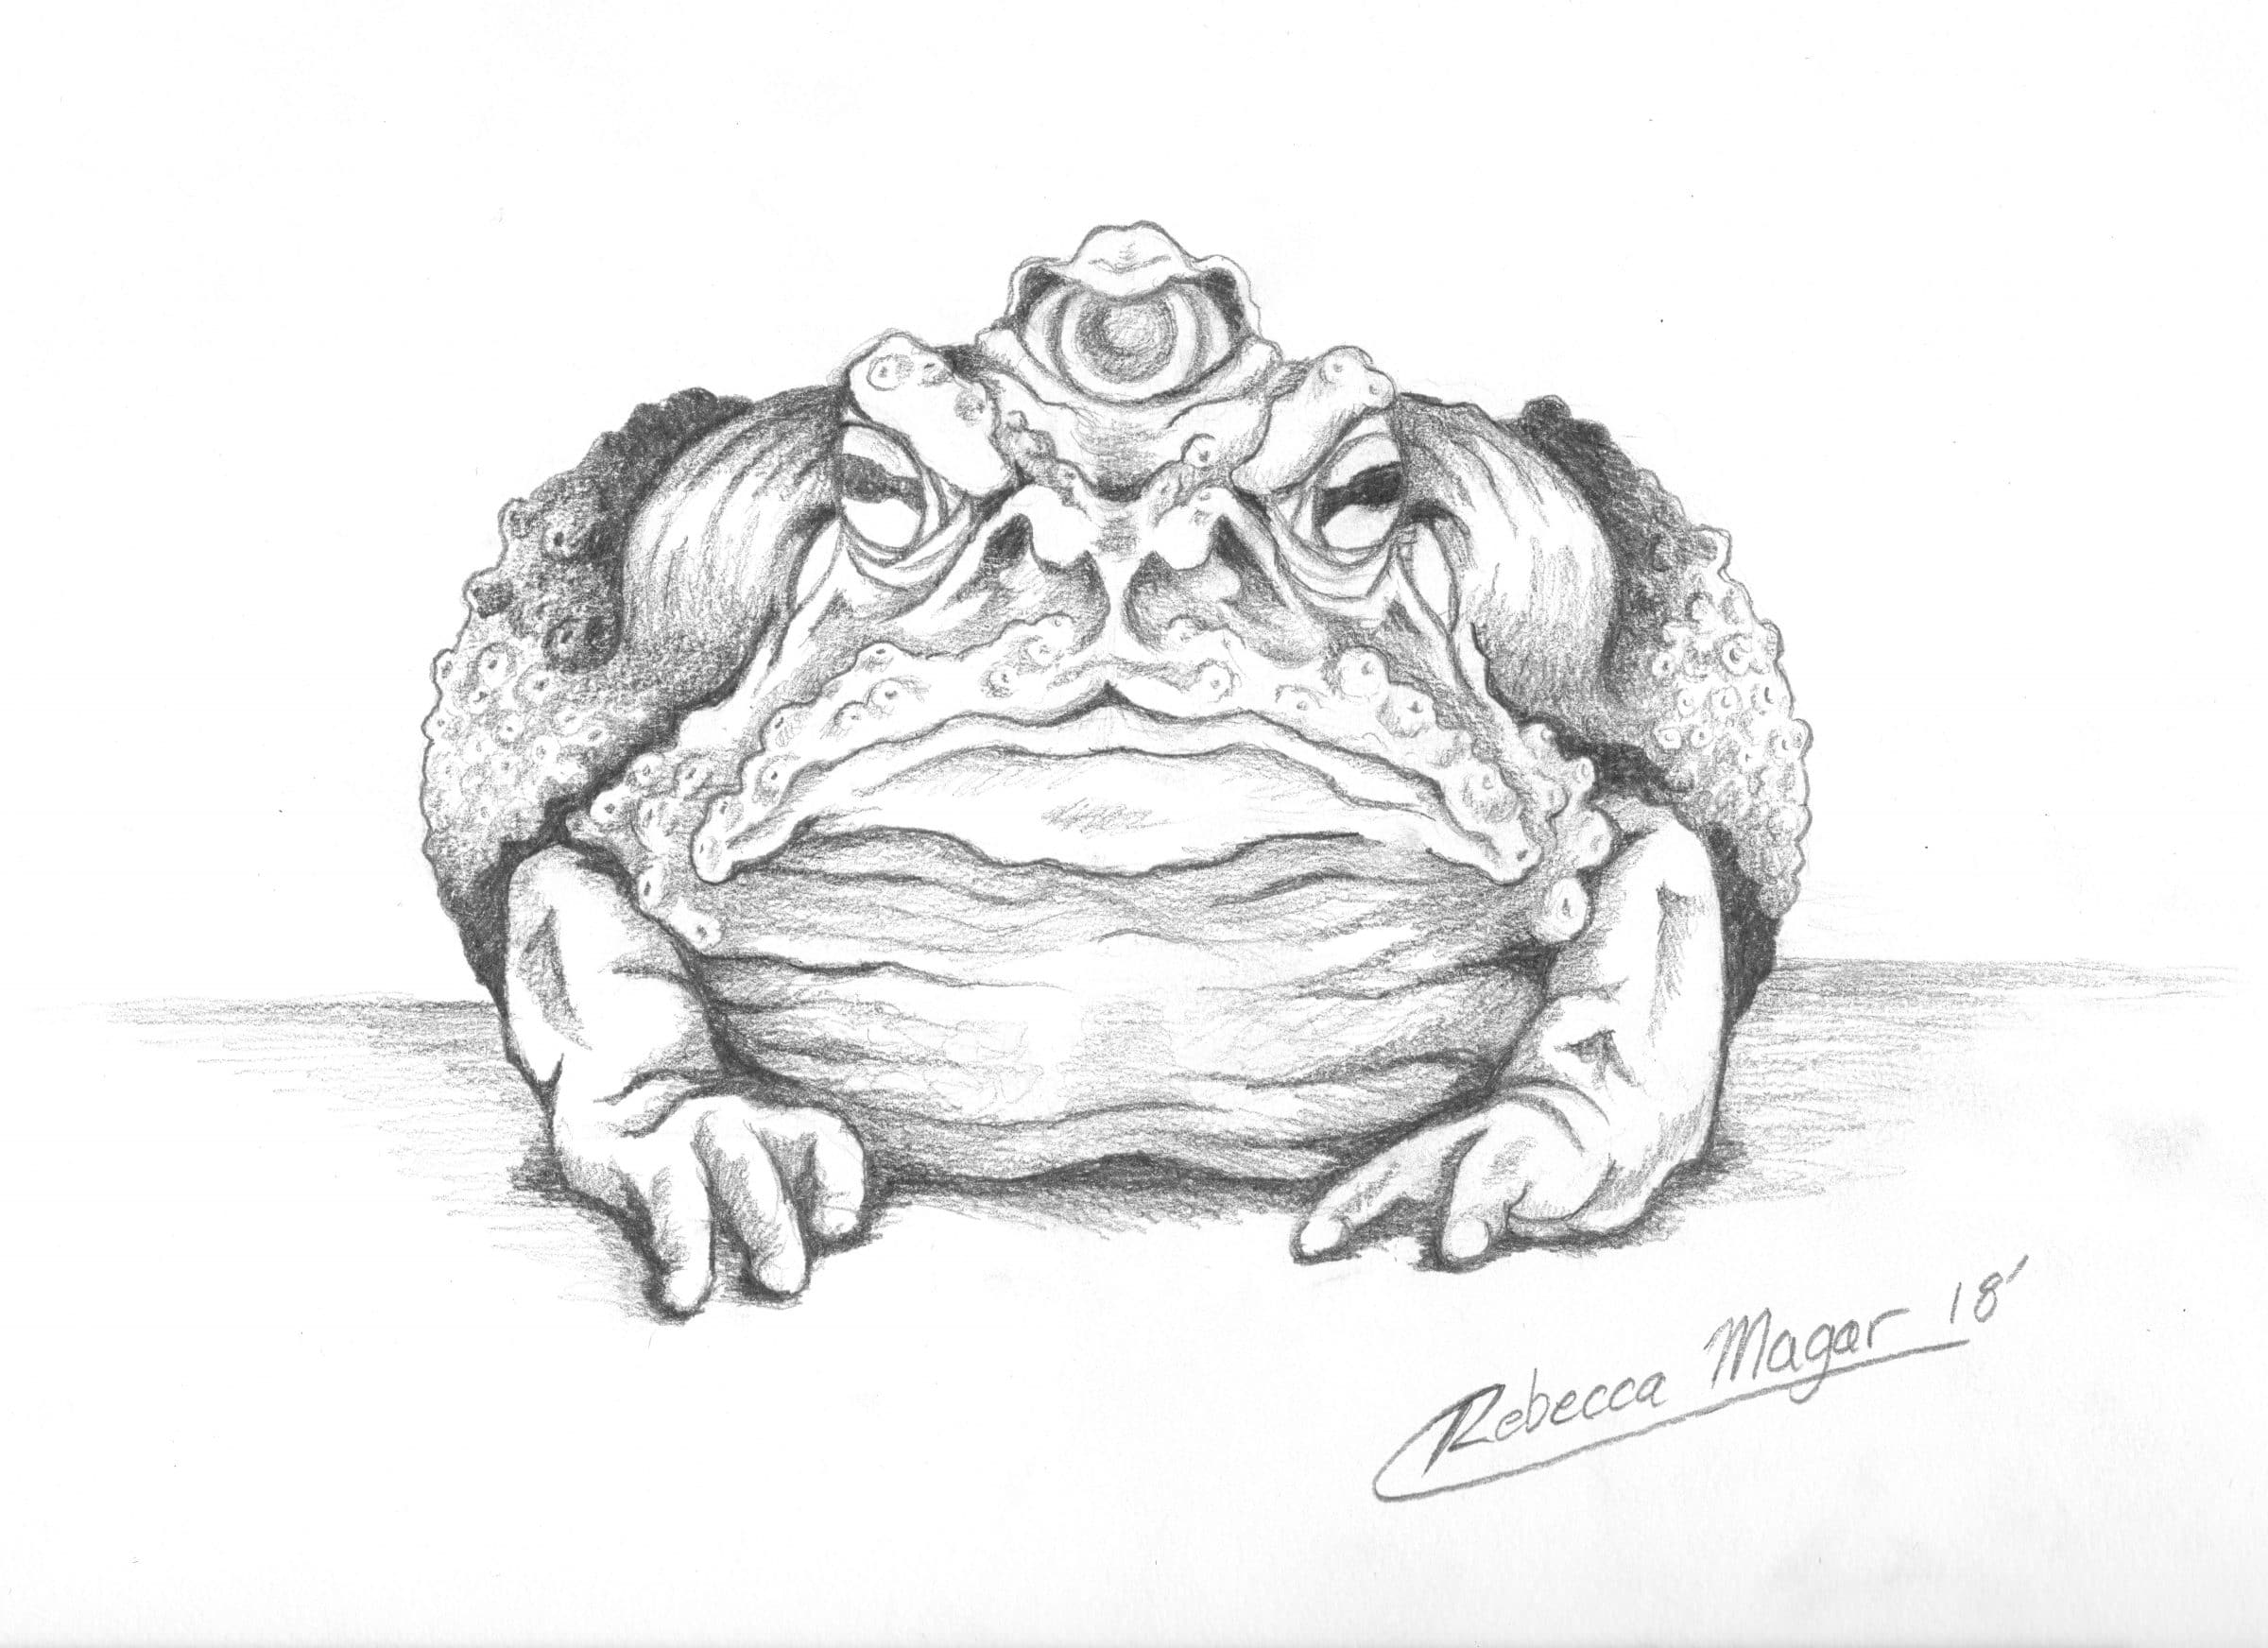 Dust Toad Concept Sketch for Book of Wyrms by Rebecca Magar